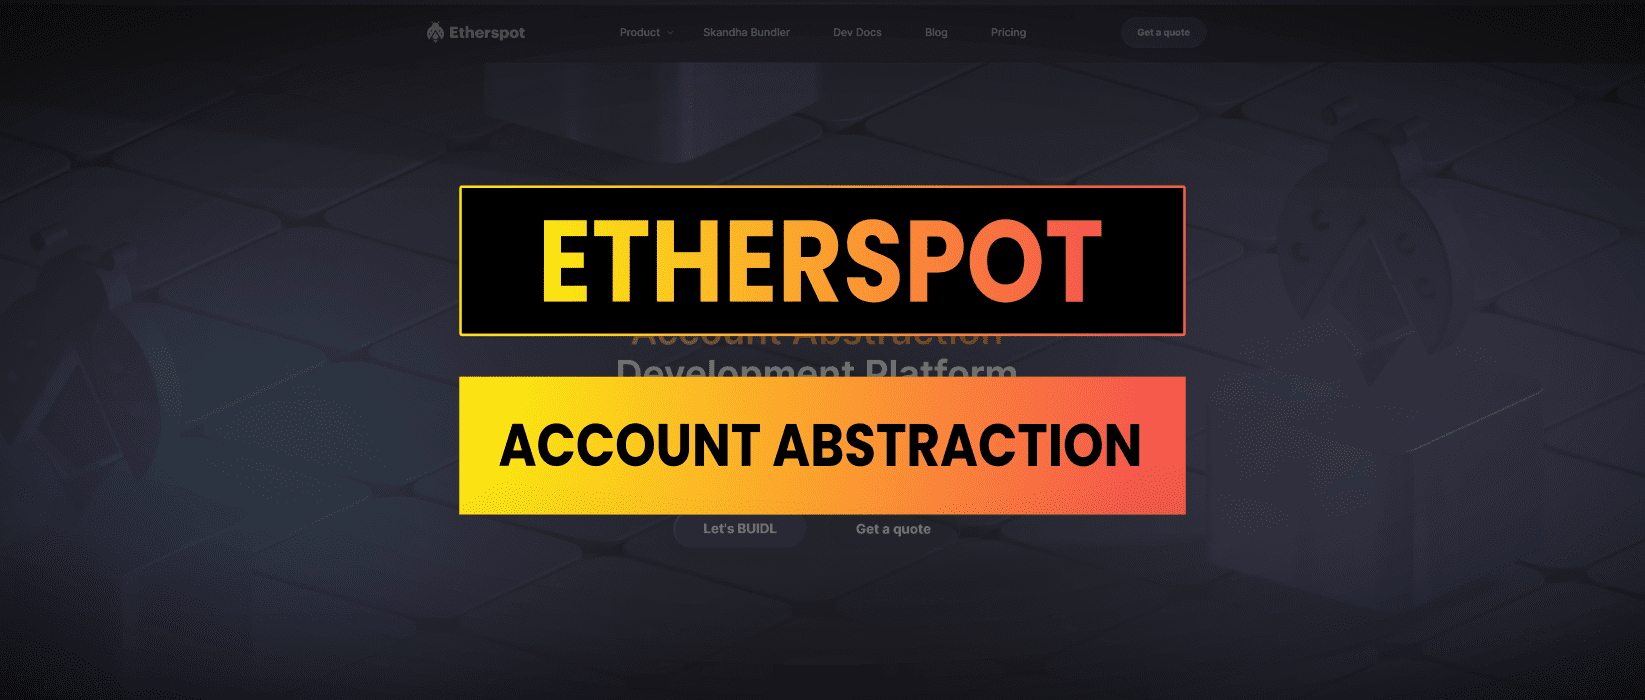 etherspot account abstraction